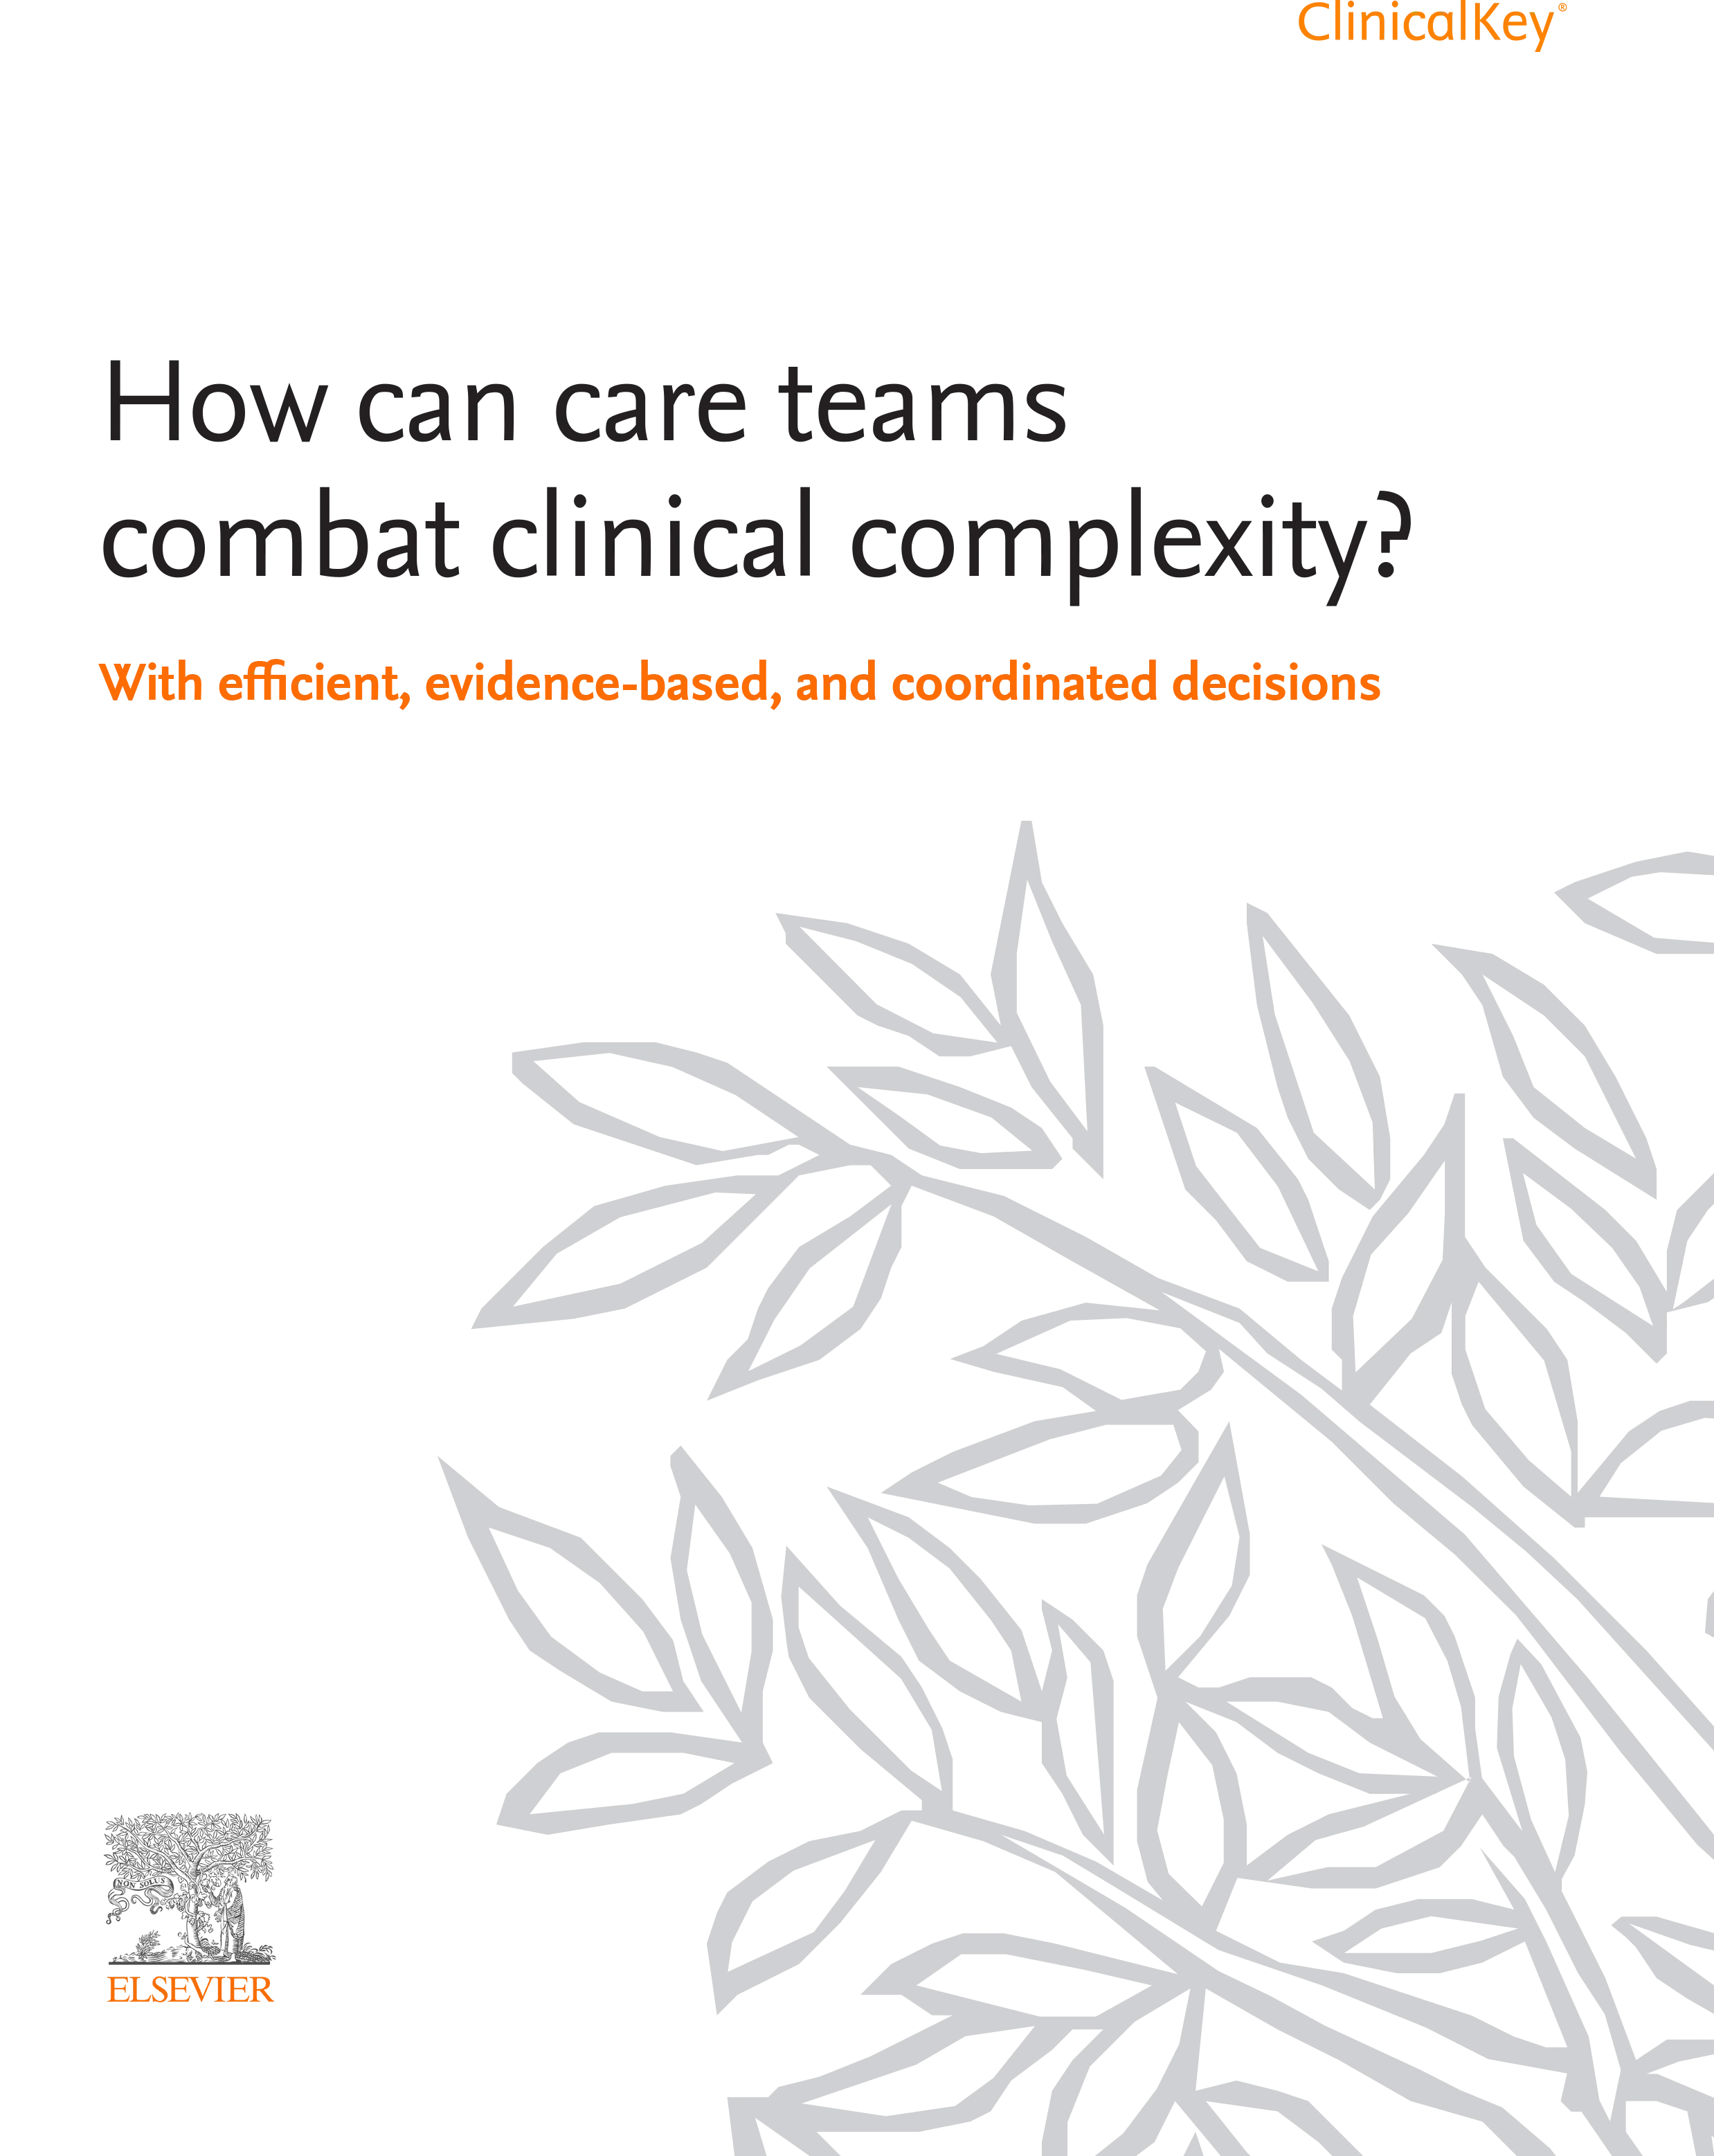 How Can Care Teams Combat Clinical Complexity